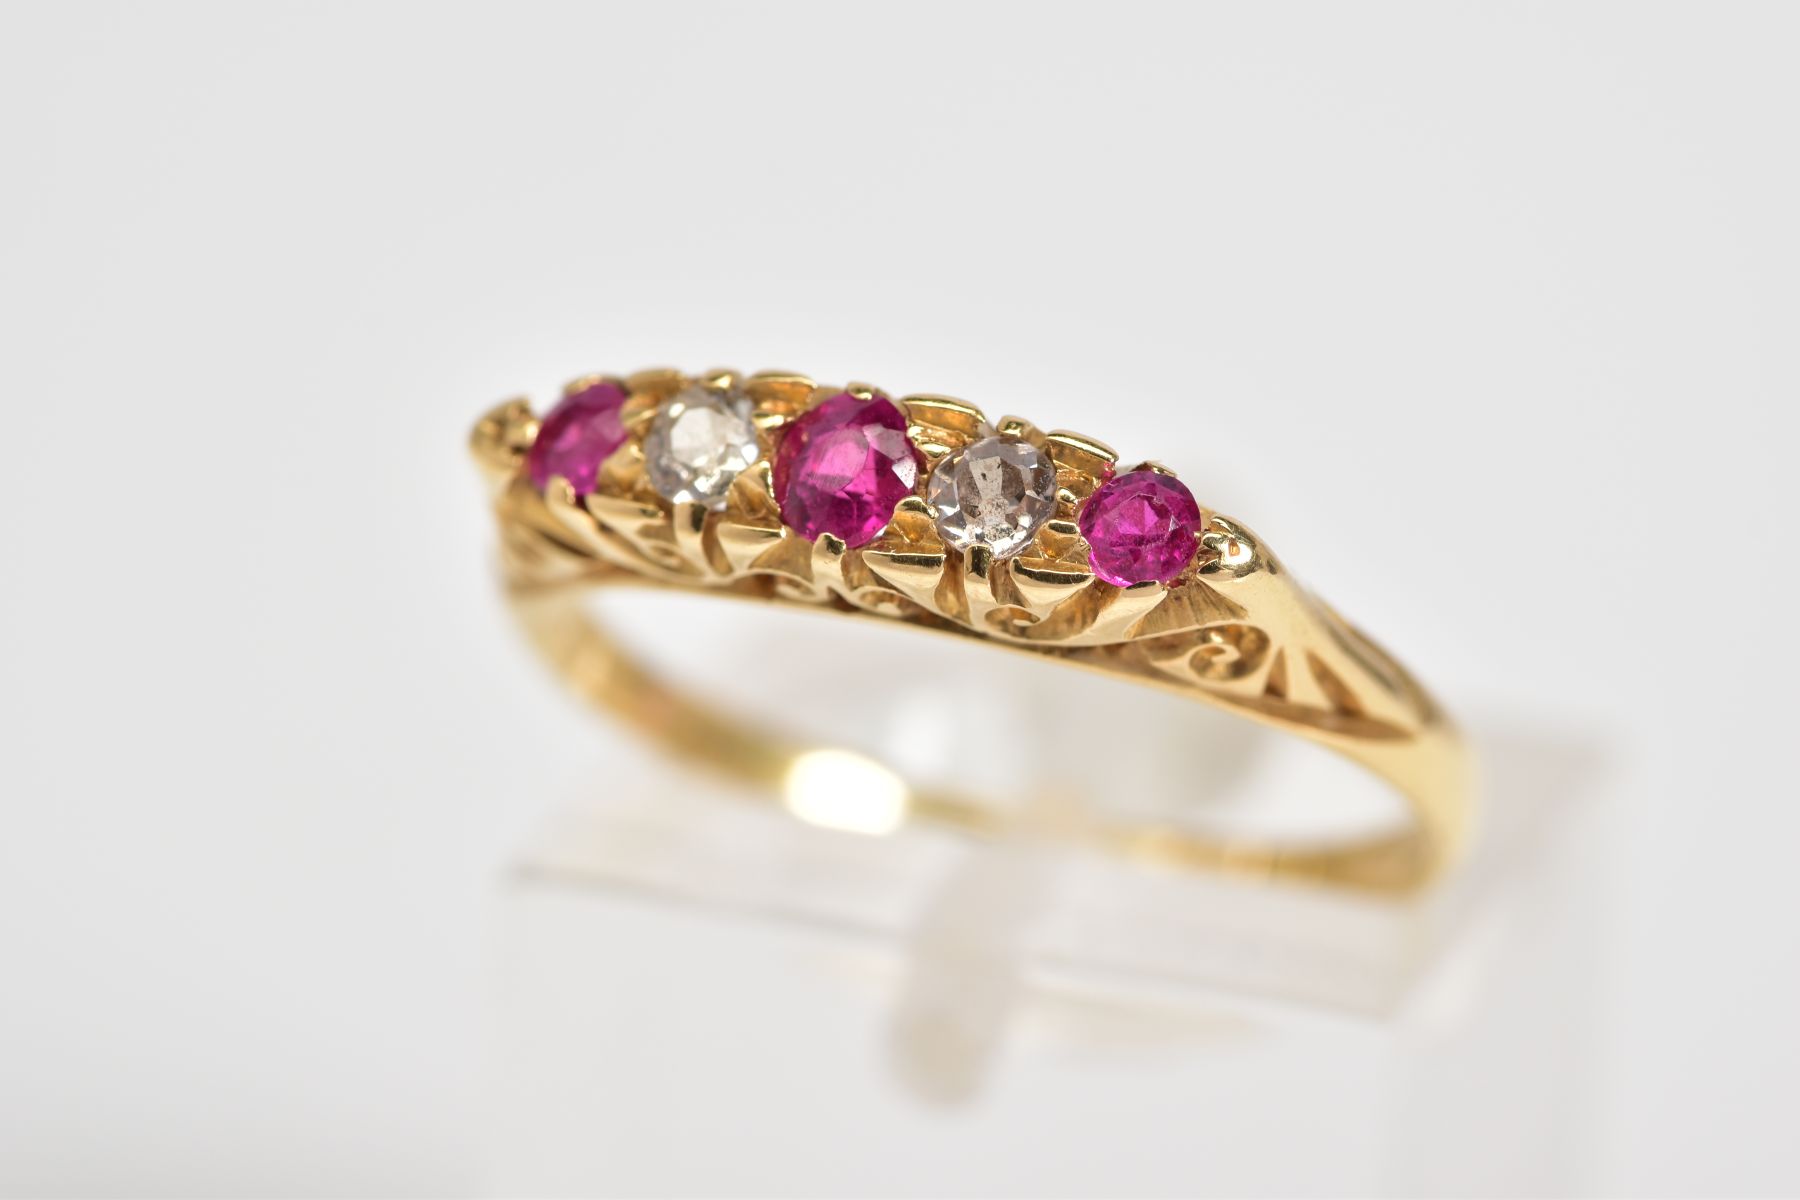 AN EARLY 20TH CENTURY 18CT GOLD RUBY AND DIAMOND RING, designed with three circular cut rubies